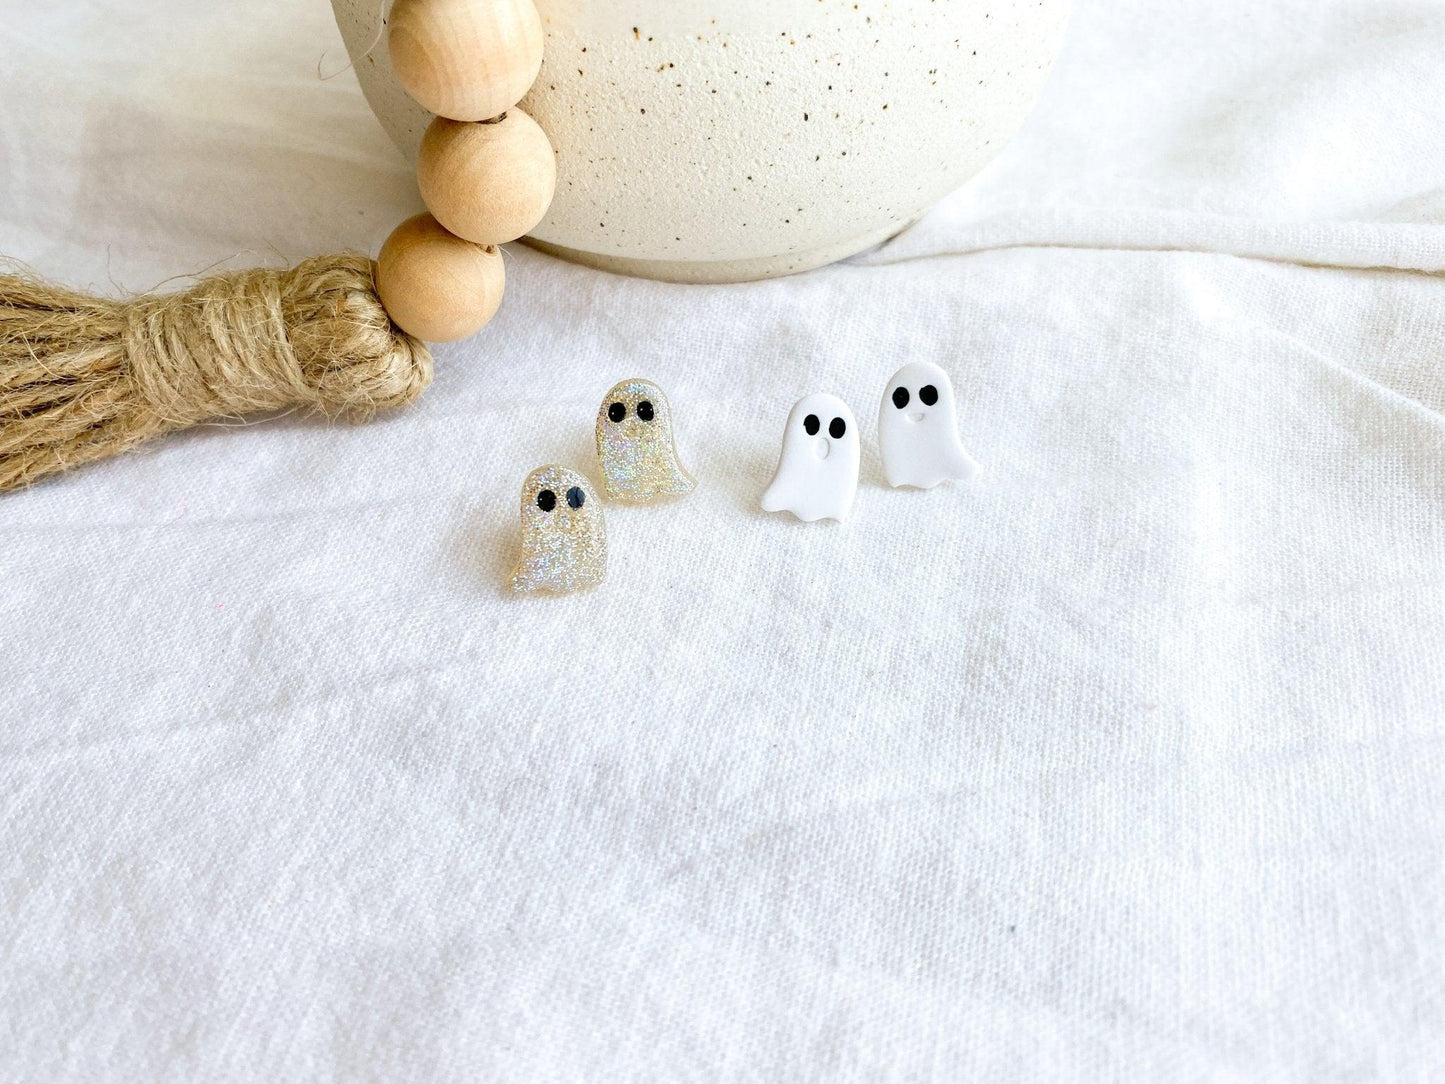 Ghost Studs - Sparkly Earrings - Ghost Jewelry - Halloween Jewelry - Fun Gift for Teacher - Birthday Gift for Friend - Harbor to Gulf Co.